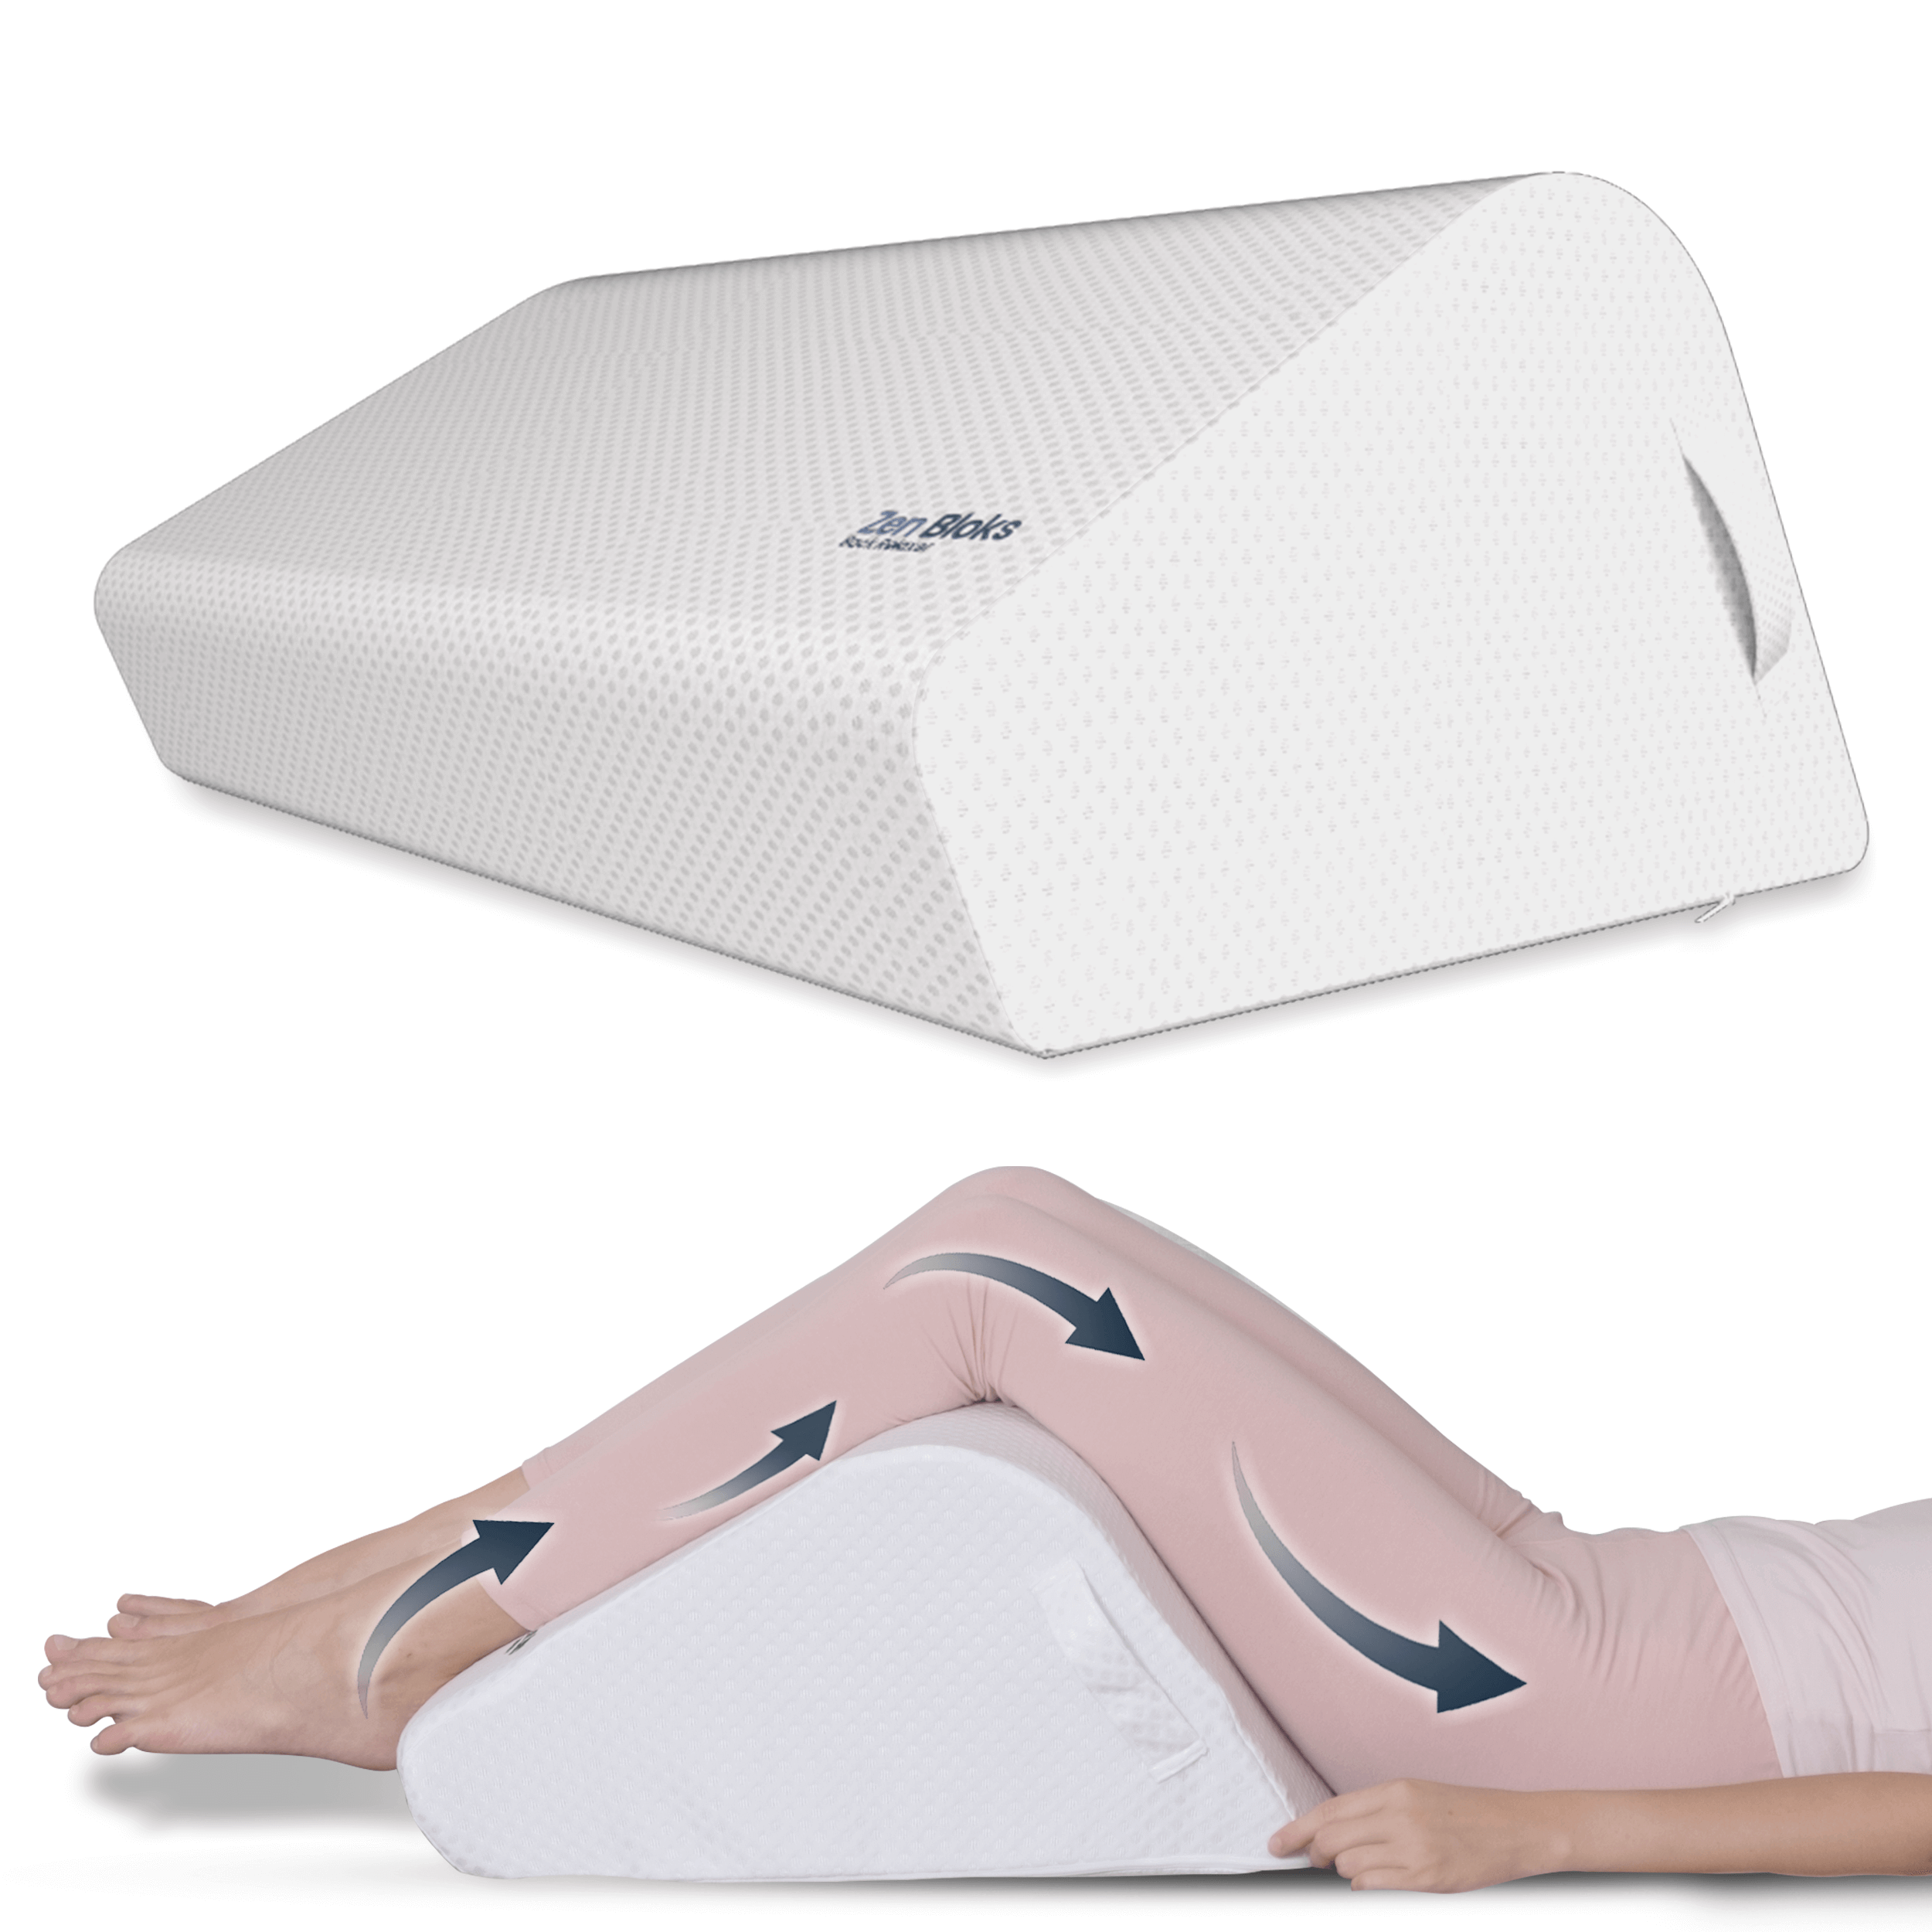 Zen Bloks Lightweight Leg Elevation Wedge- Lower Back Pain Relief - Knee Pillow for Leg and Back Relaxation  - Small/Medium 10" White - Person Height Range 5'0"-5'7"